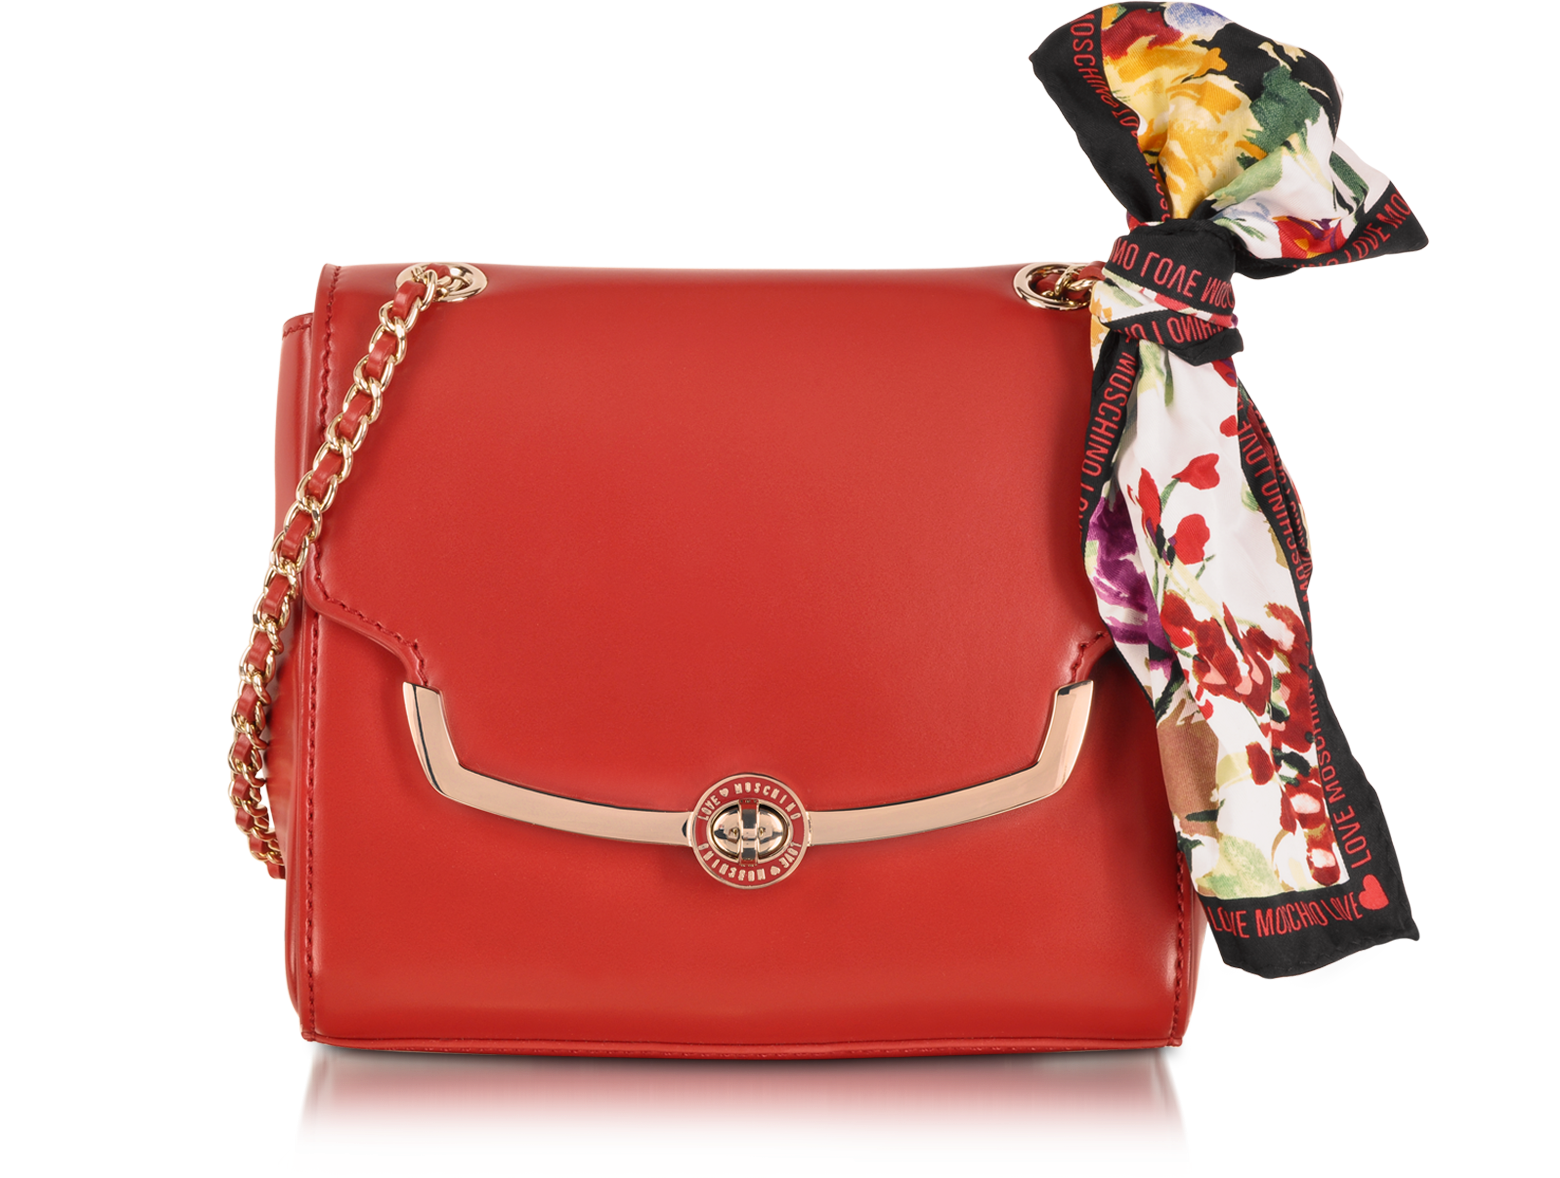 Moschino Red Love Moschino Eco Leather Small Bag at FORZIERI